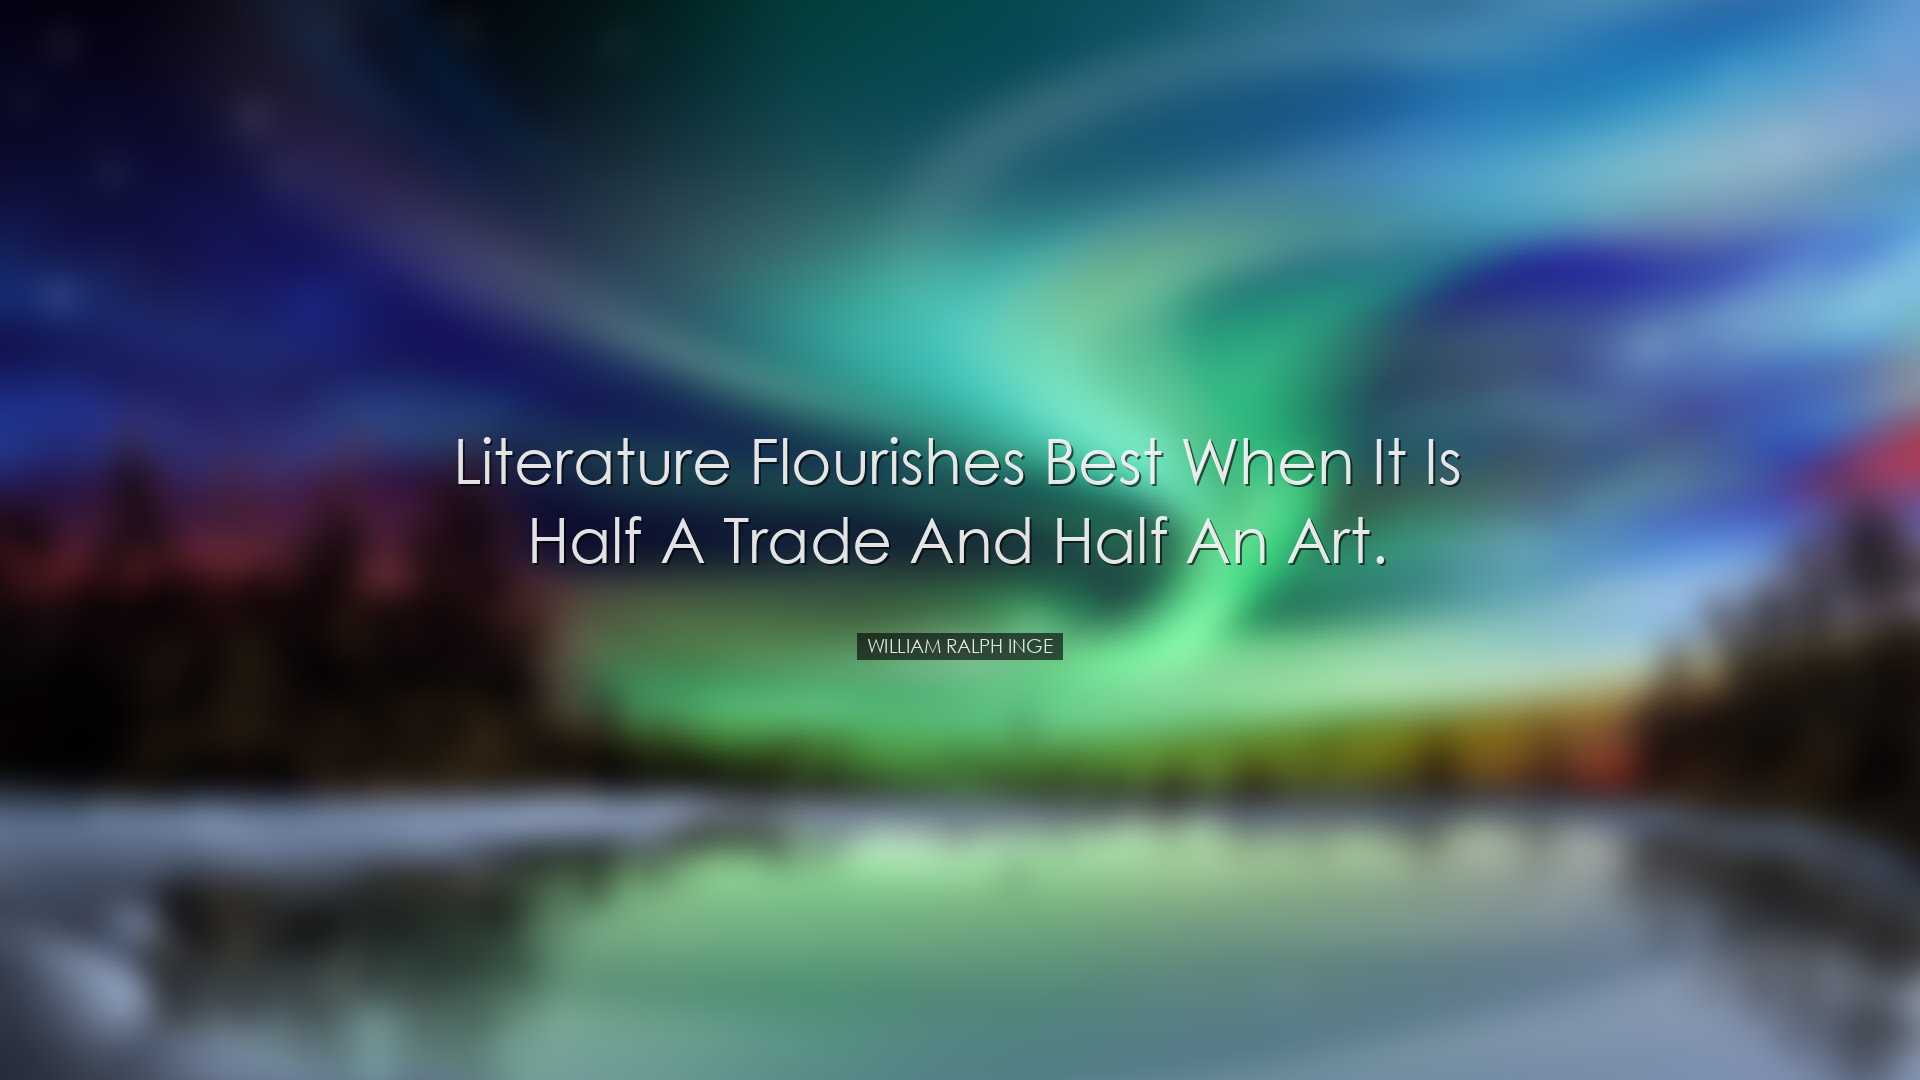 Literature flourishes best when it is half a trade and half an art